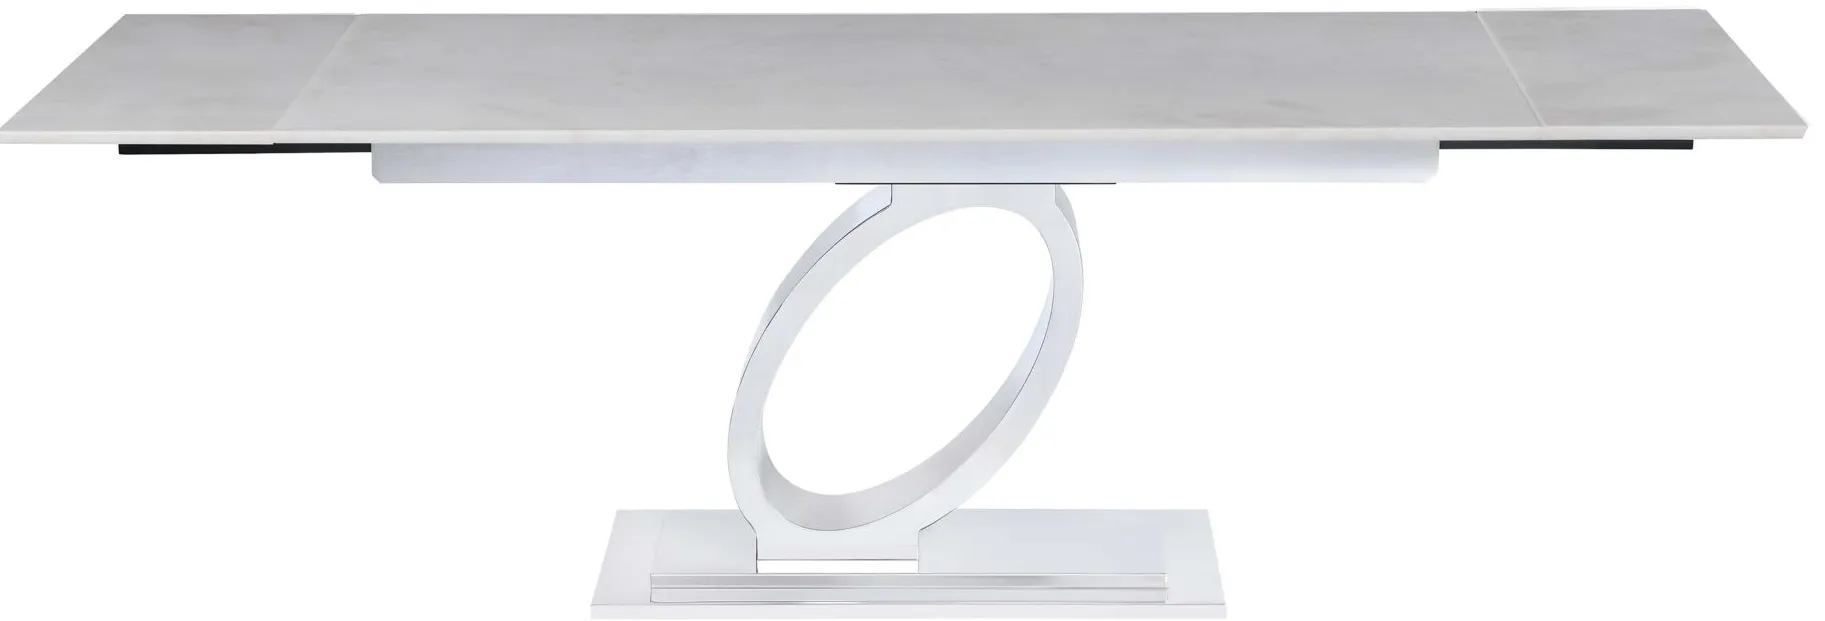 Lanna Dining Table in White by Chintaly Imports